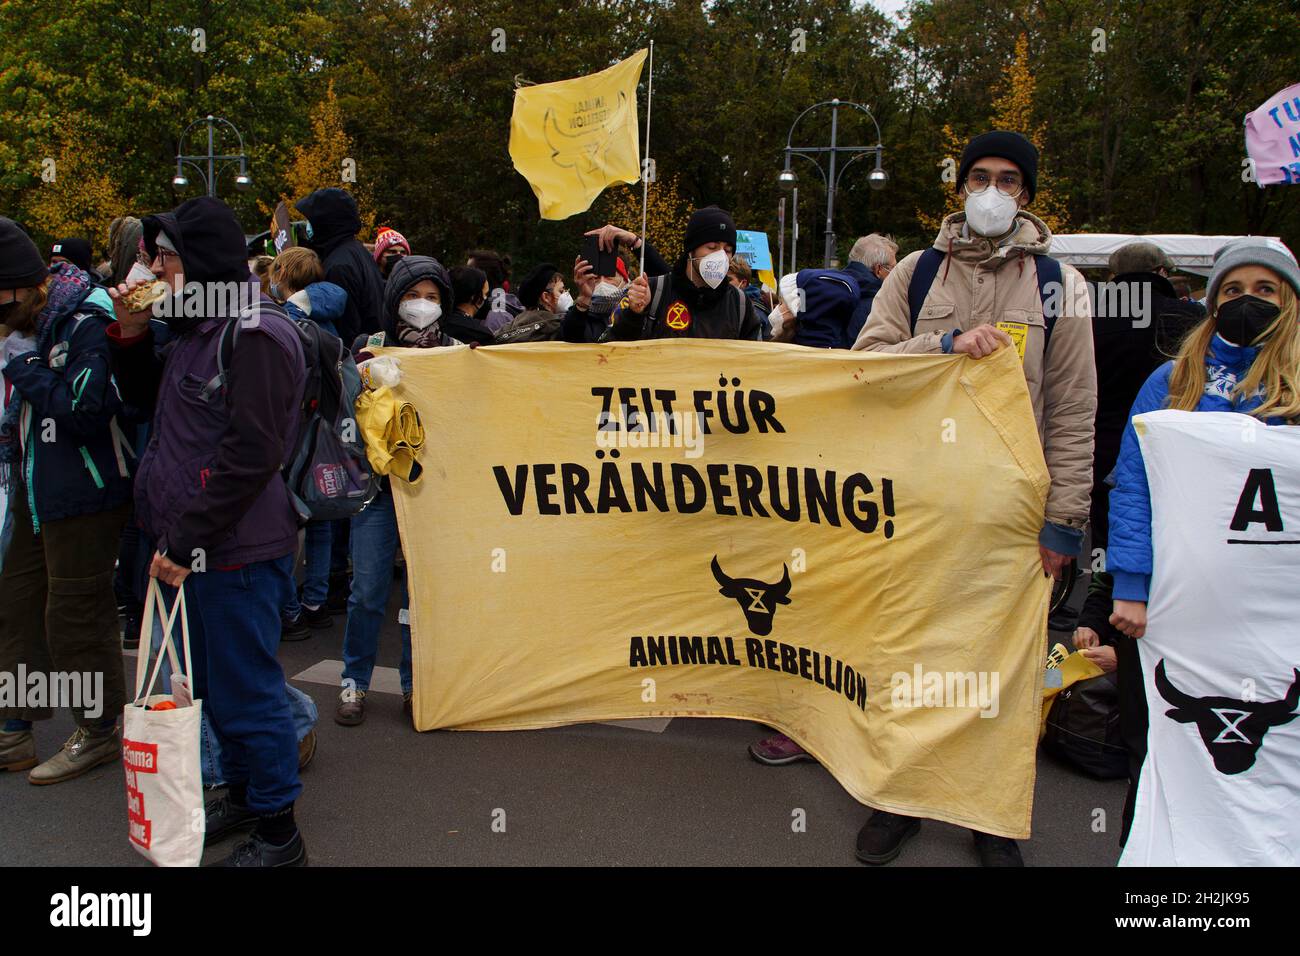 Climate demo in Berlin, Germany, 22 October 2021 Stock Photo